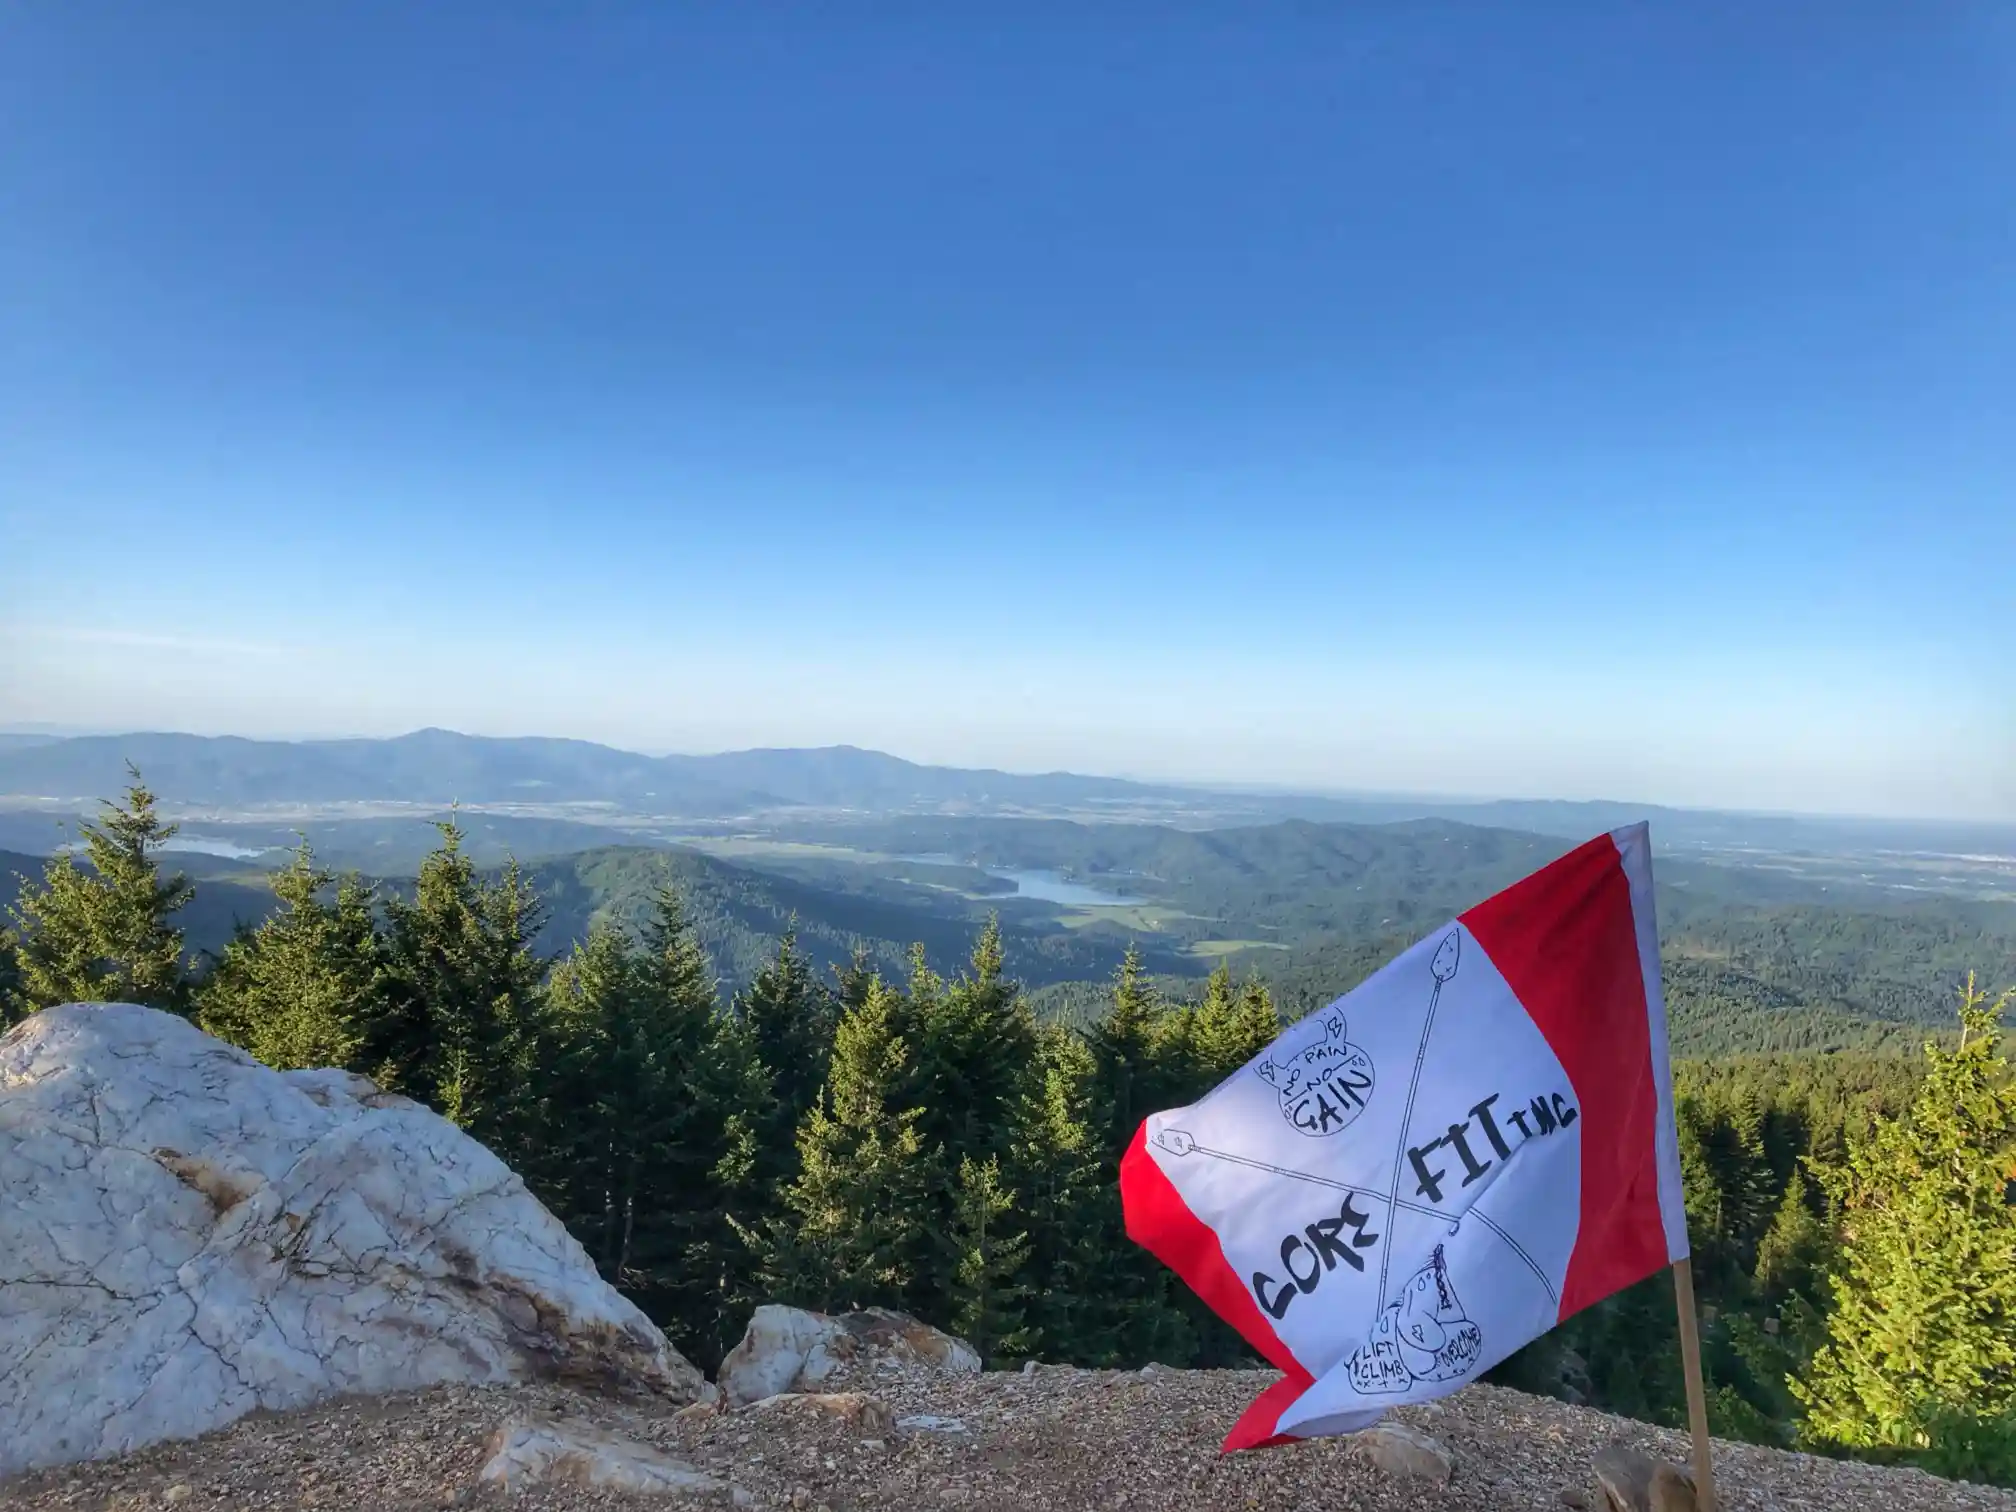 backdrop image; a view from a mountain top with a CoreFit flag planted slightly right of center